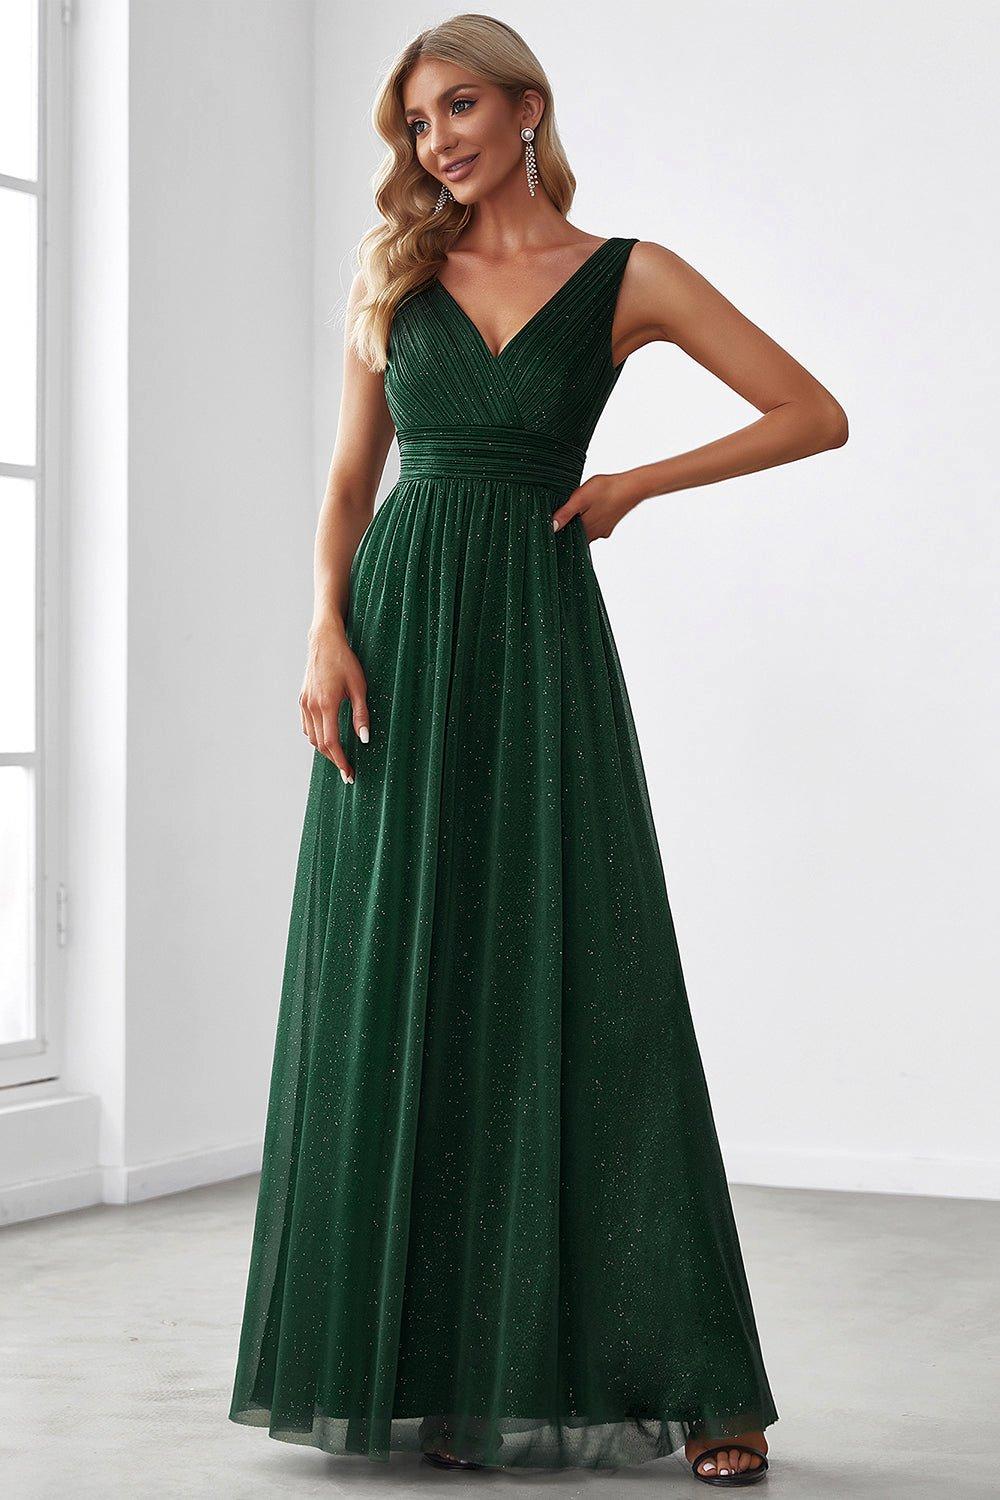 Double V Neck Floor Length Sparkly Evening Dresses for Party